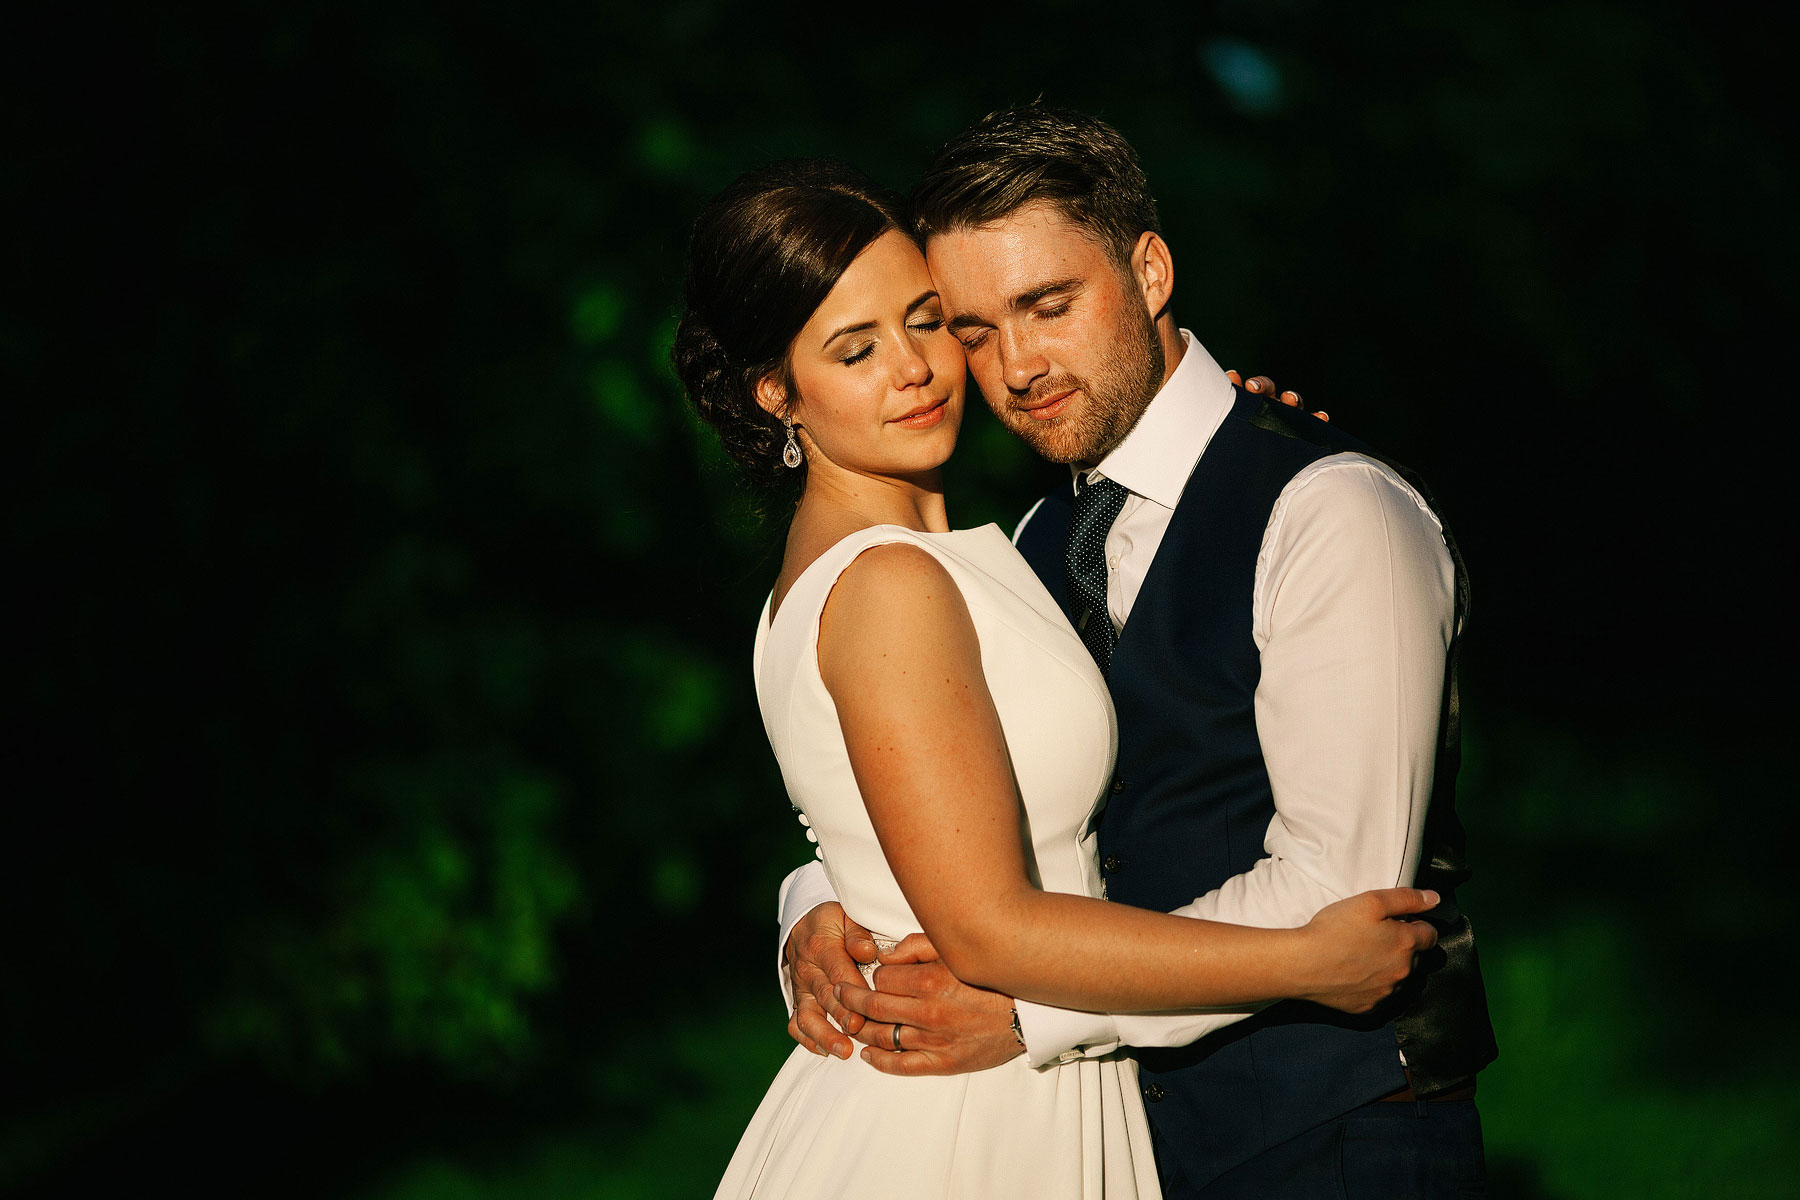 quirky and amazing wedding photos in yorkshire